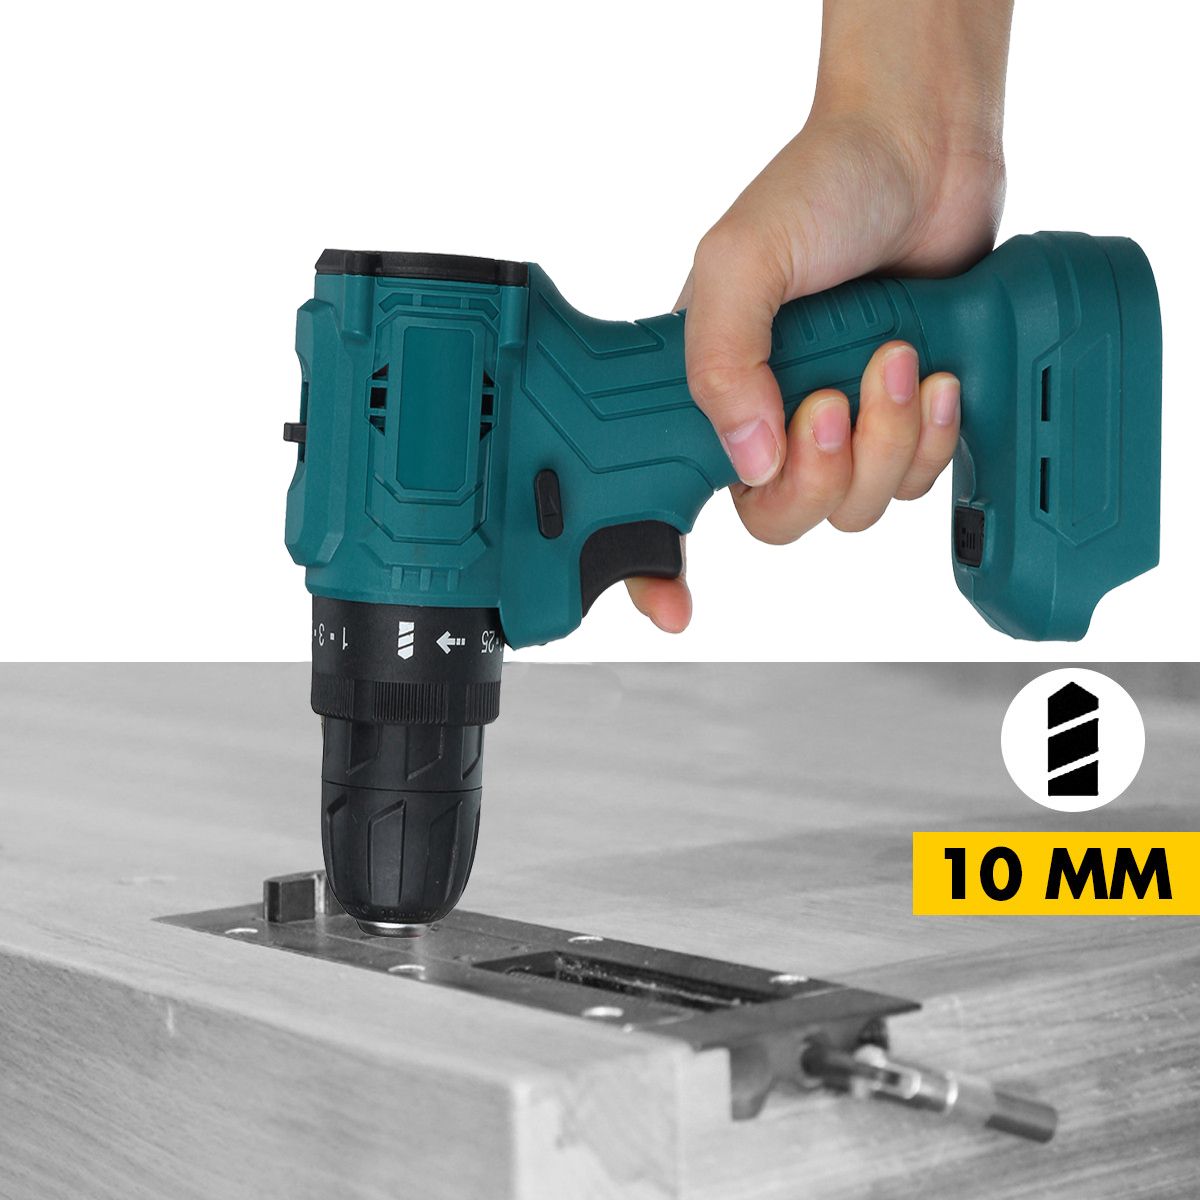 350Nm-1800rpm-Brushless-Electric-Drill-LED-Rechargeable-Power-Drill-For-Makita-18V-Battery-1735667